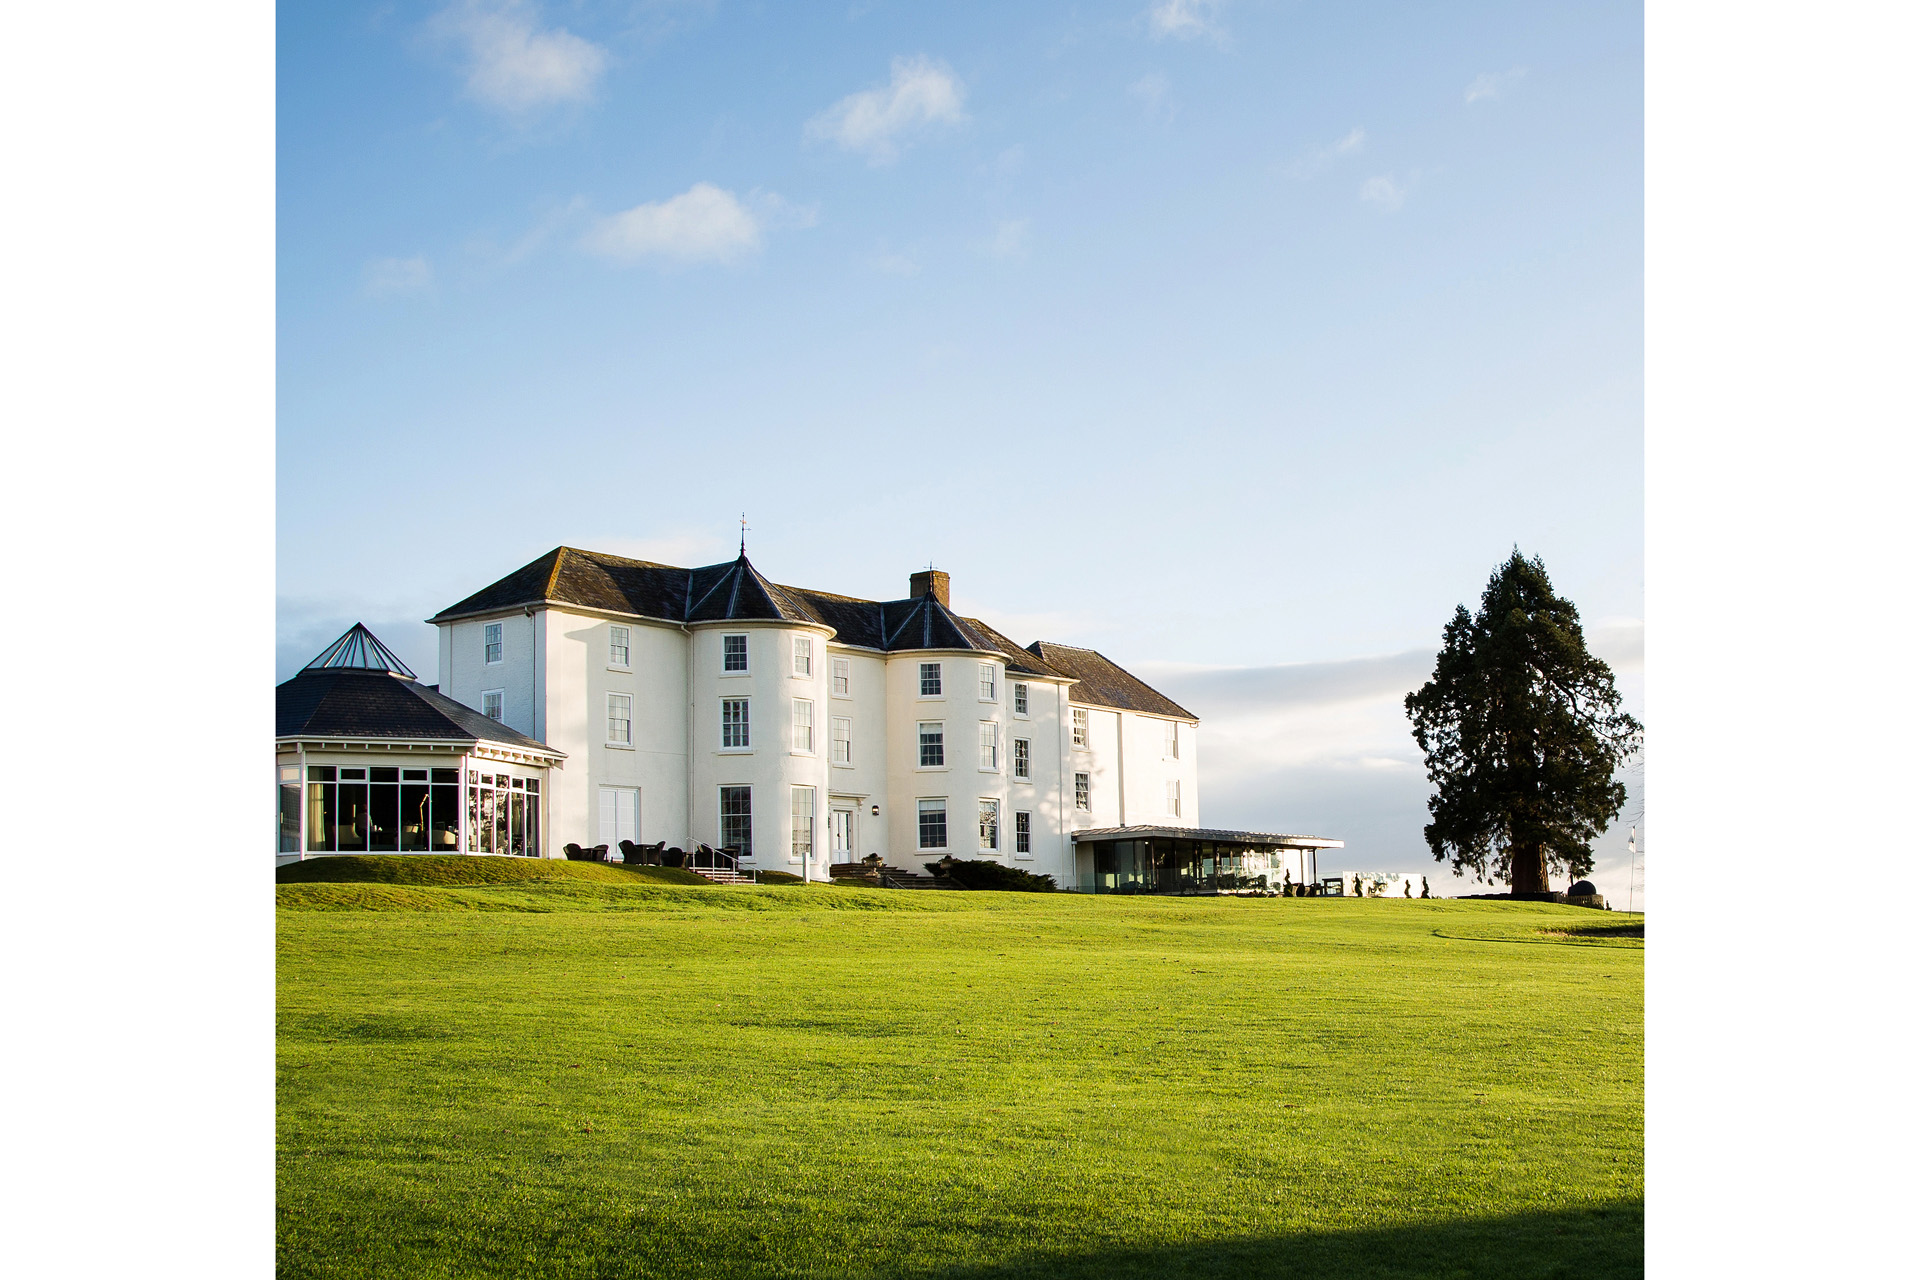 Tewkesbury Park, a countryside hotel surrounded by greenery